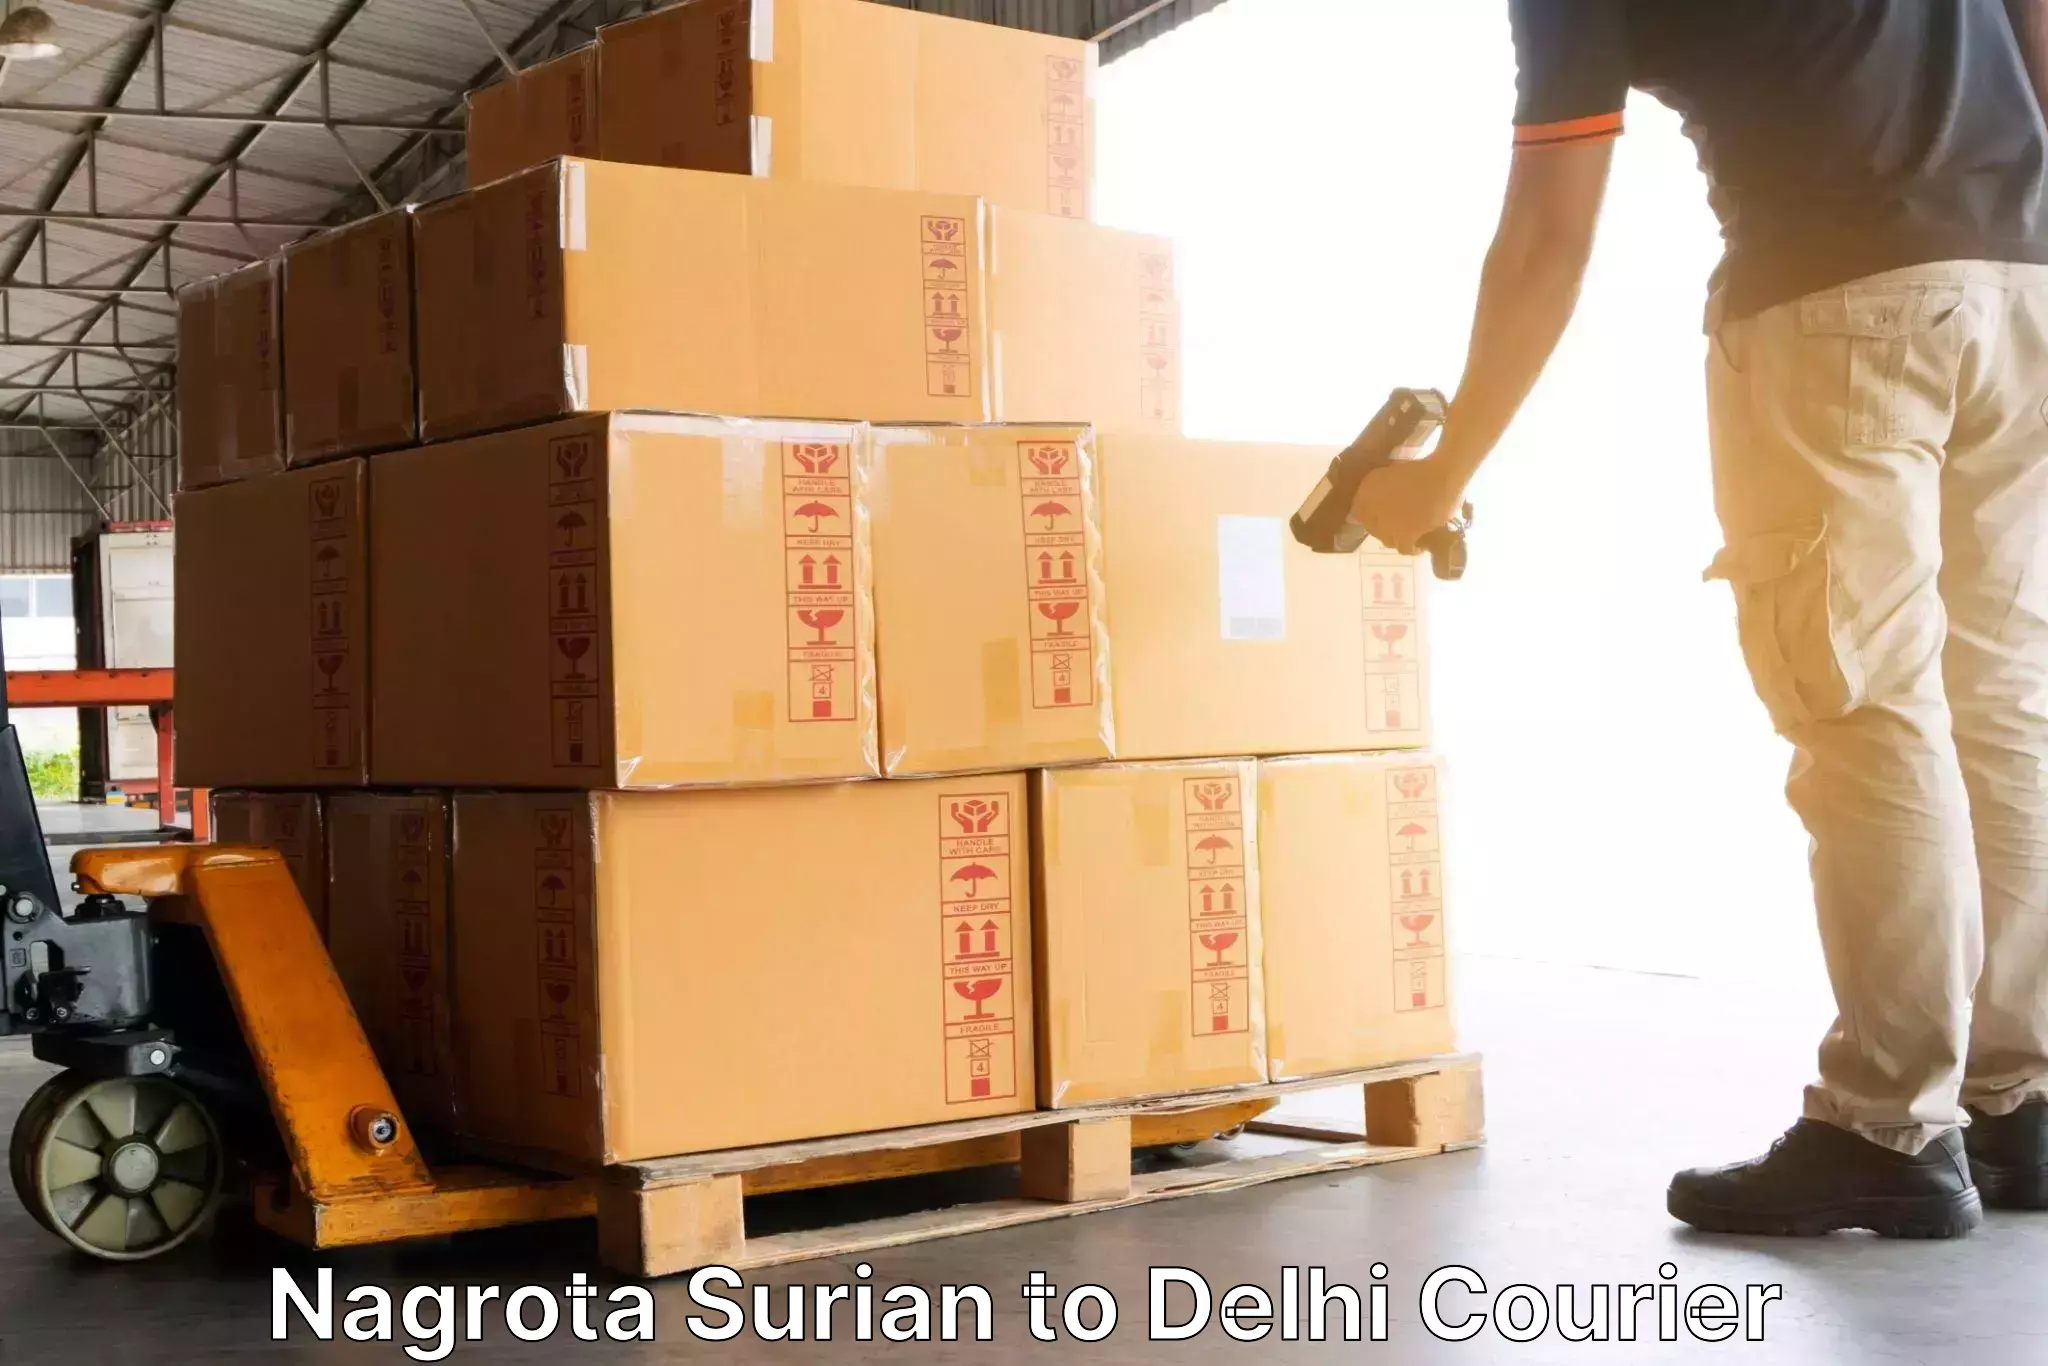 Express delivery solutions Nagrota Surian to Delhi